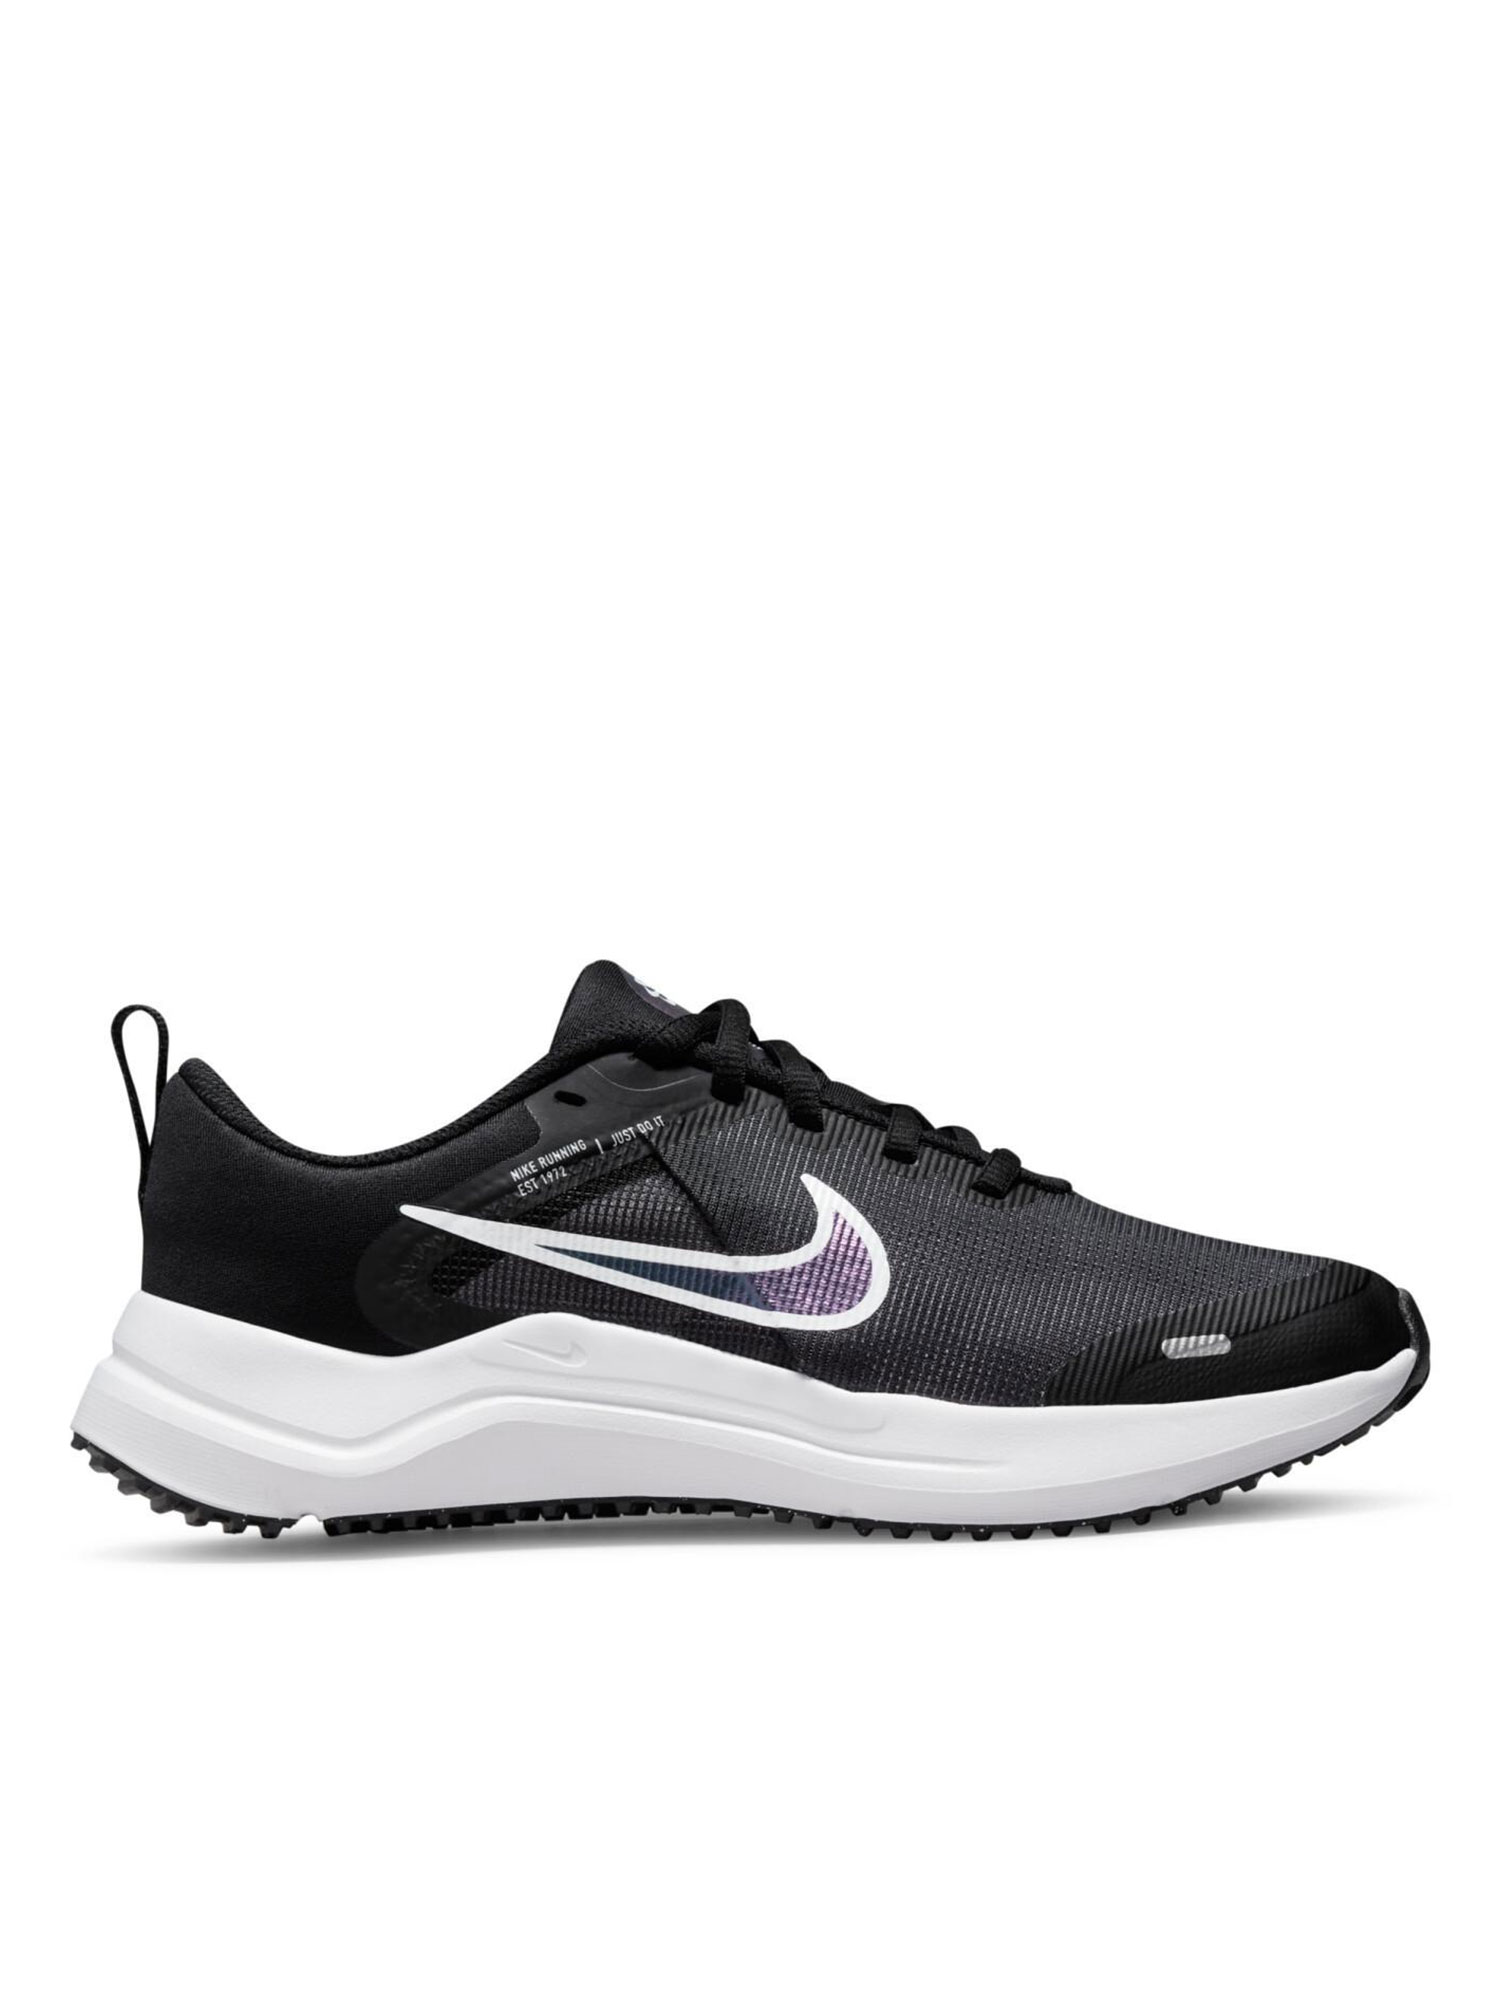 SNEAKERS NIKE DOWNSHIFTER GS - NERO-ARGENTO